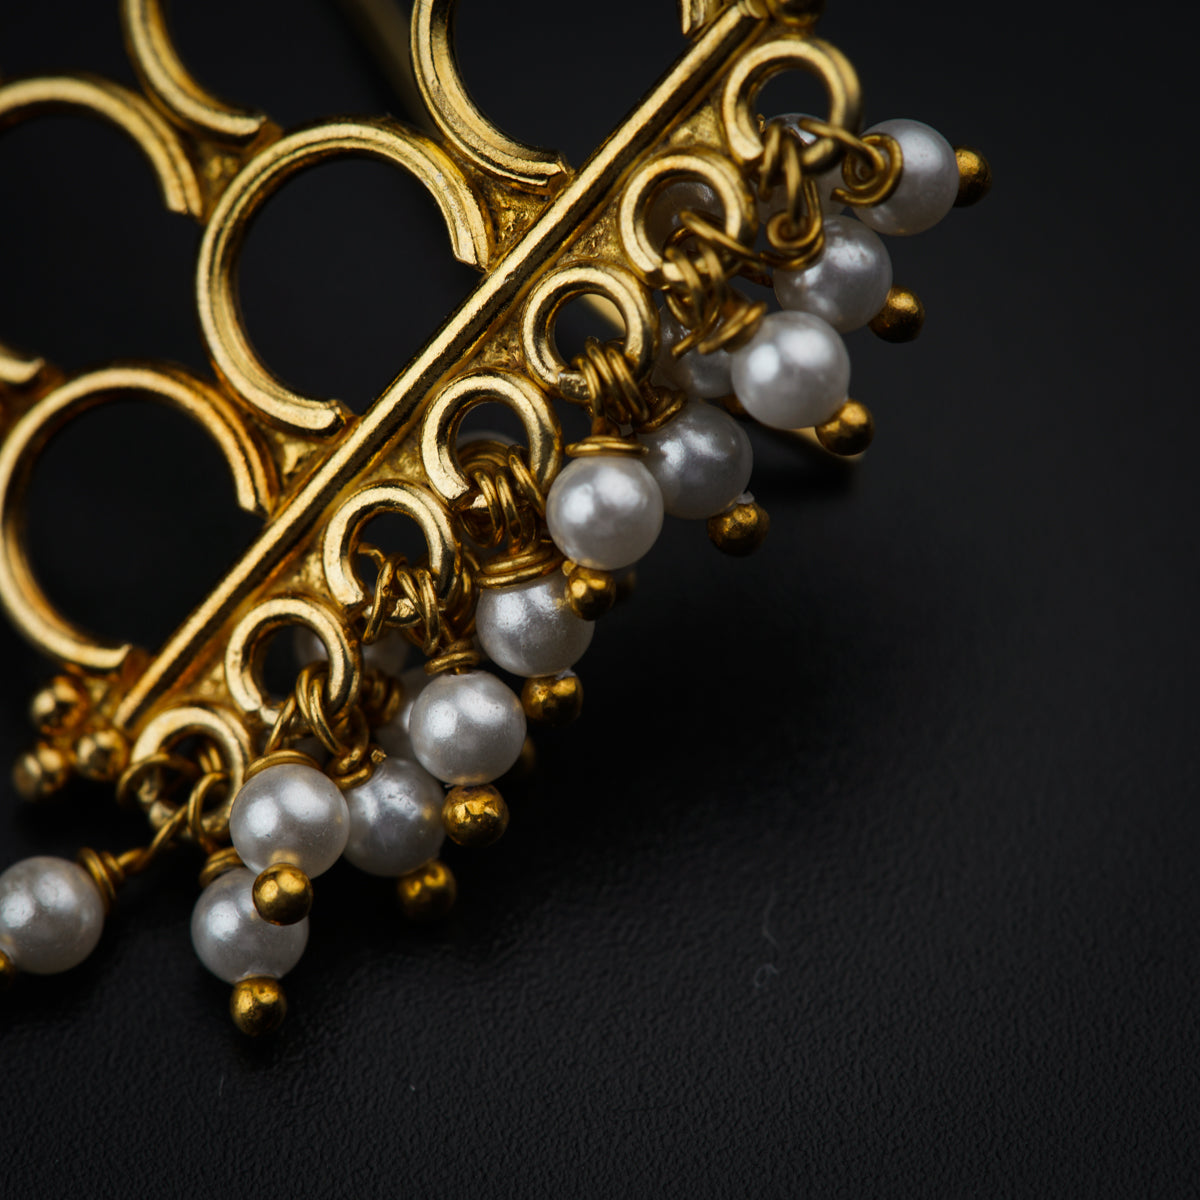 a close up of a gold brooch with pearls